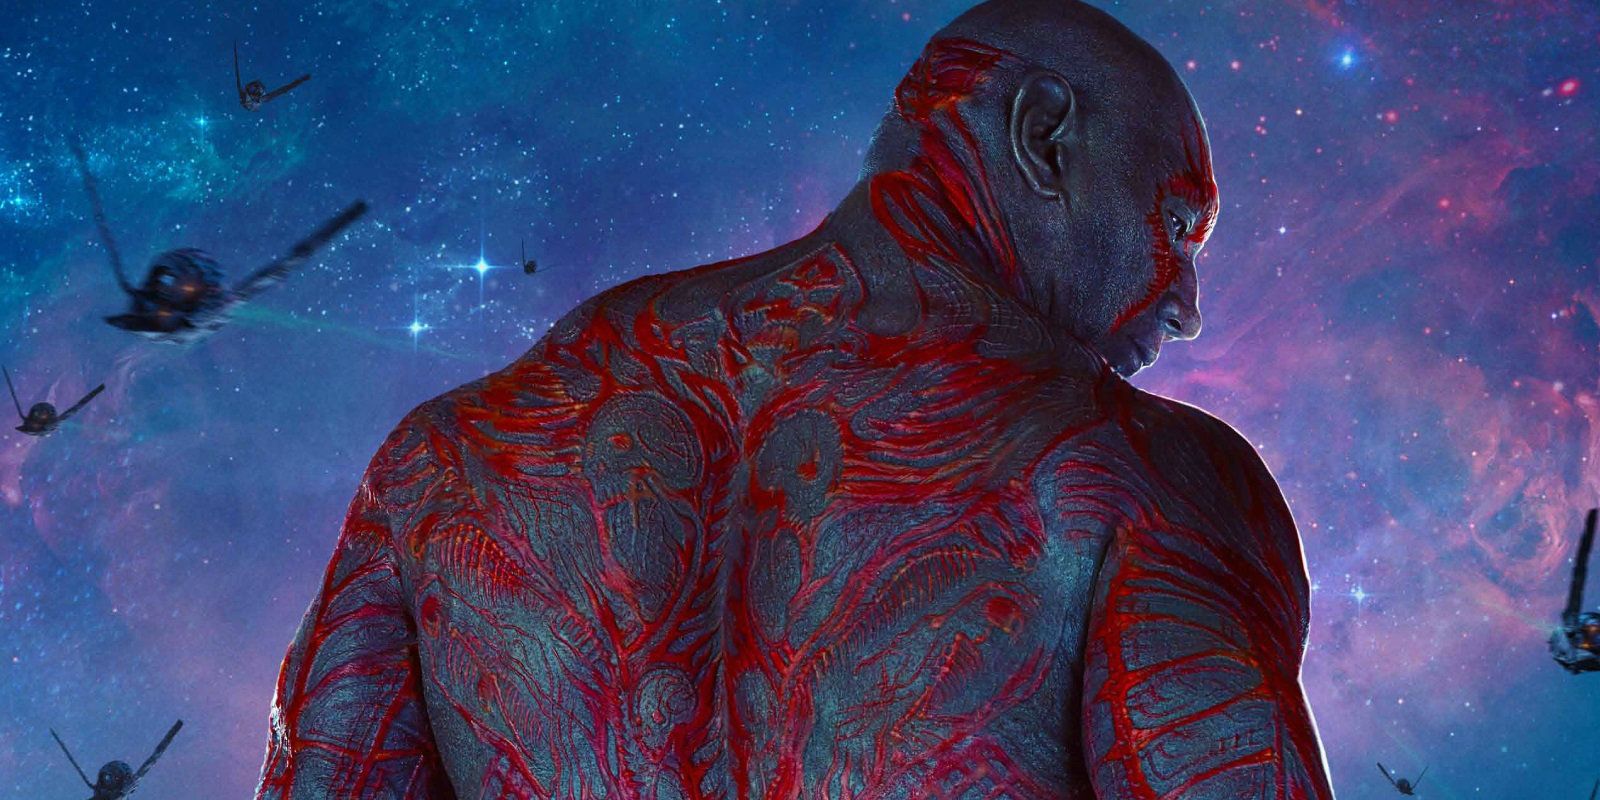 Guardians of the Galaxy - Drax (Dave Bautista)